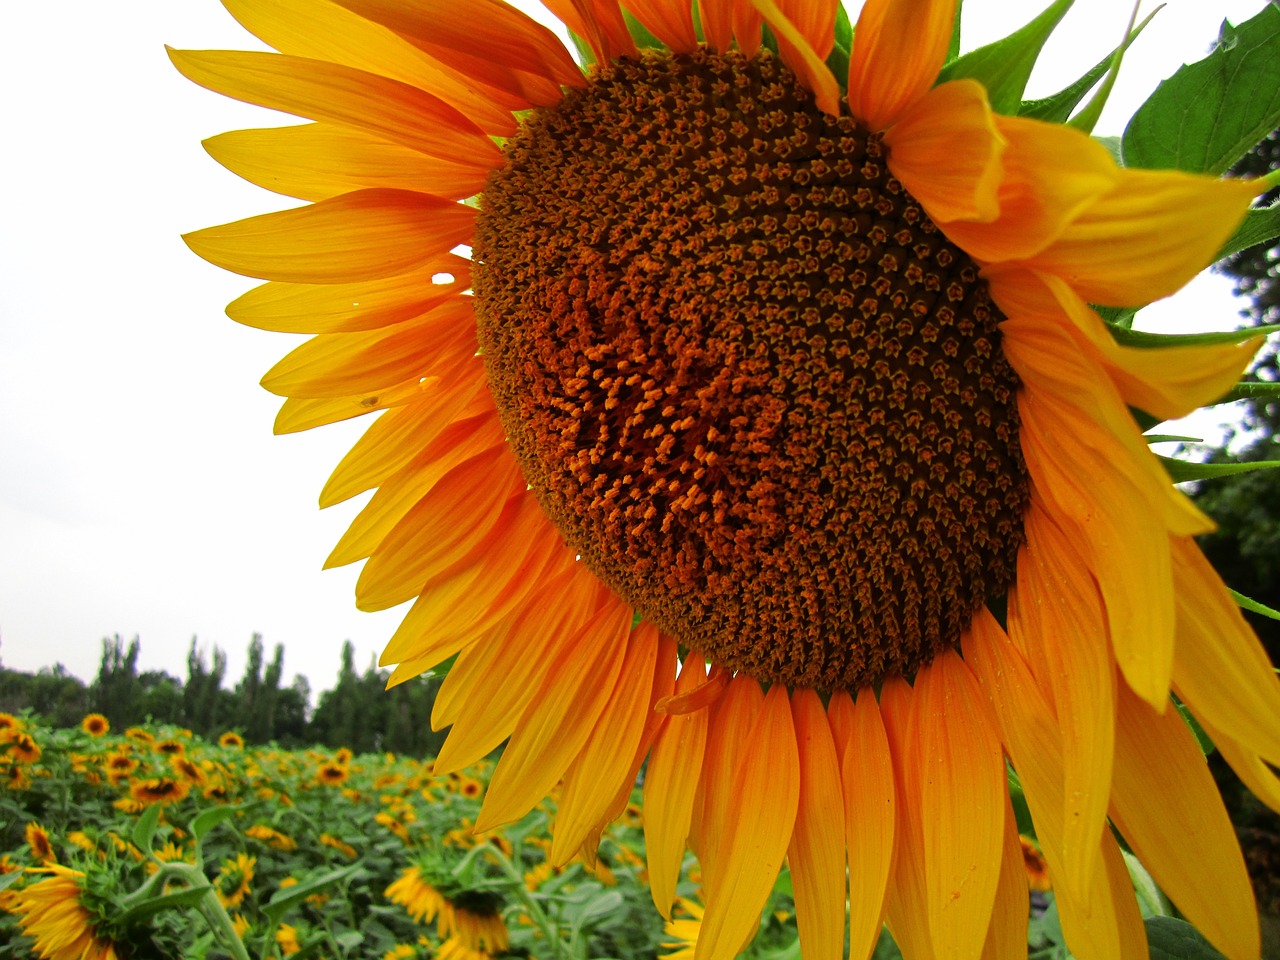 Download free photo of Sunflower,field,flower,plants,natue - from ...